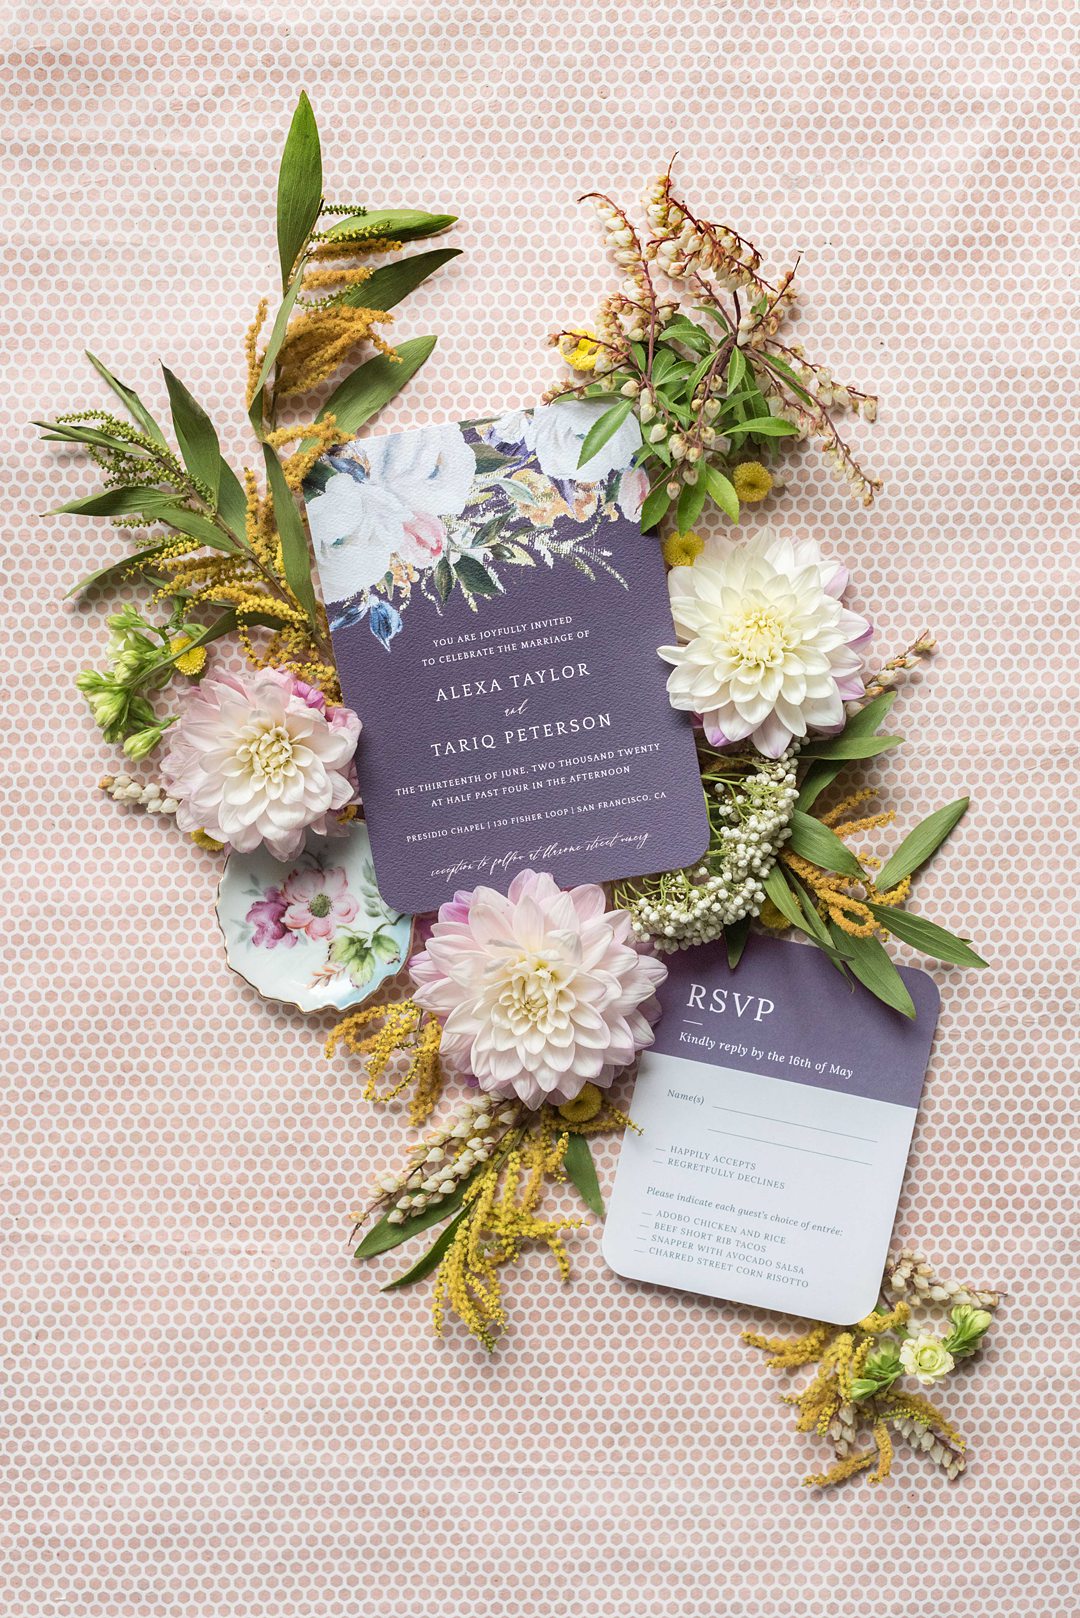 Wedding stationery offered by Zola photographed by Mikkel Paige Photography.